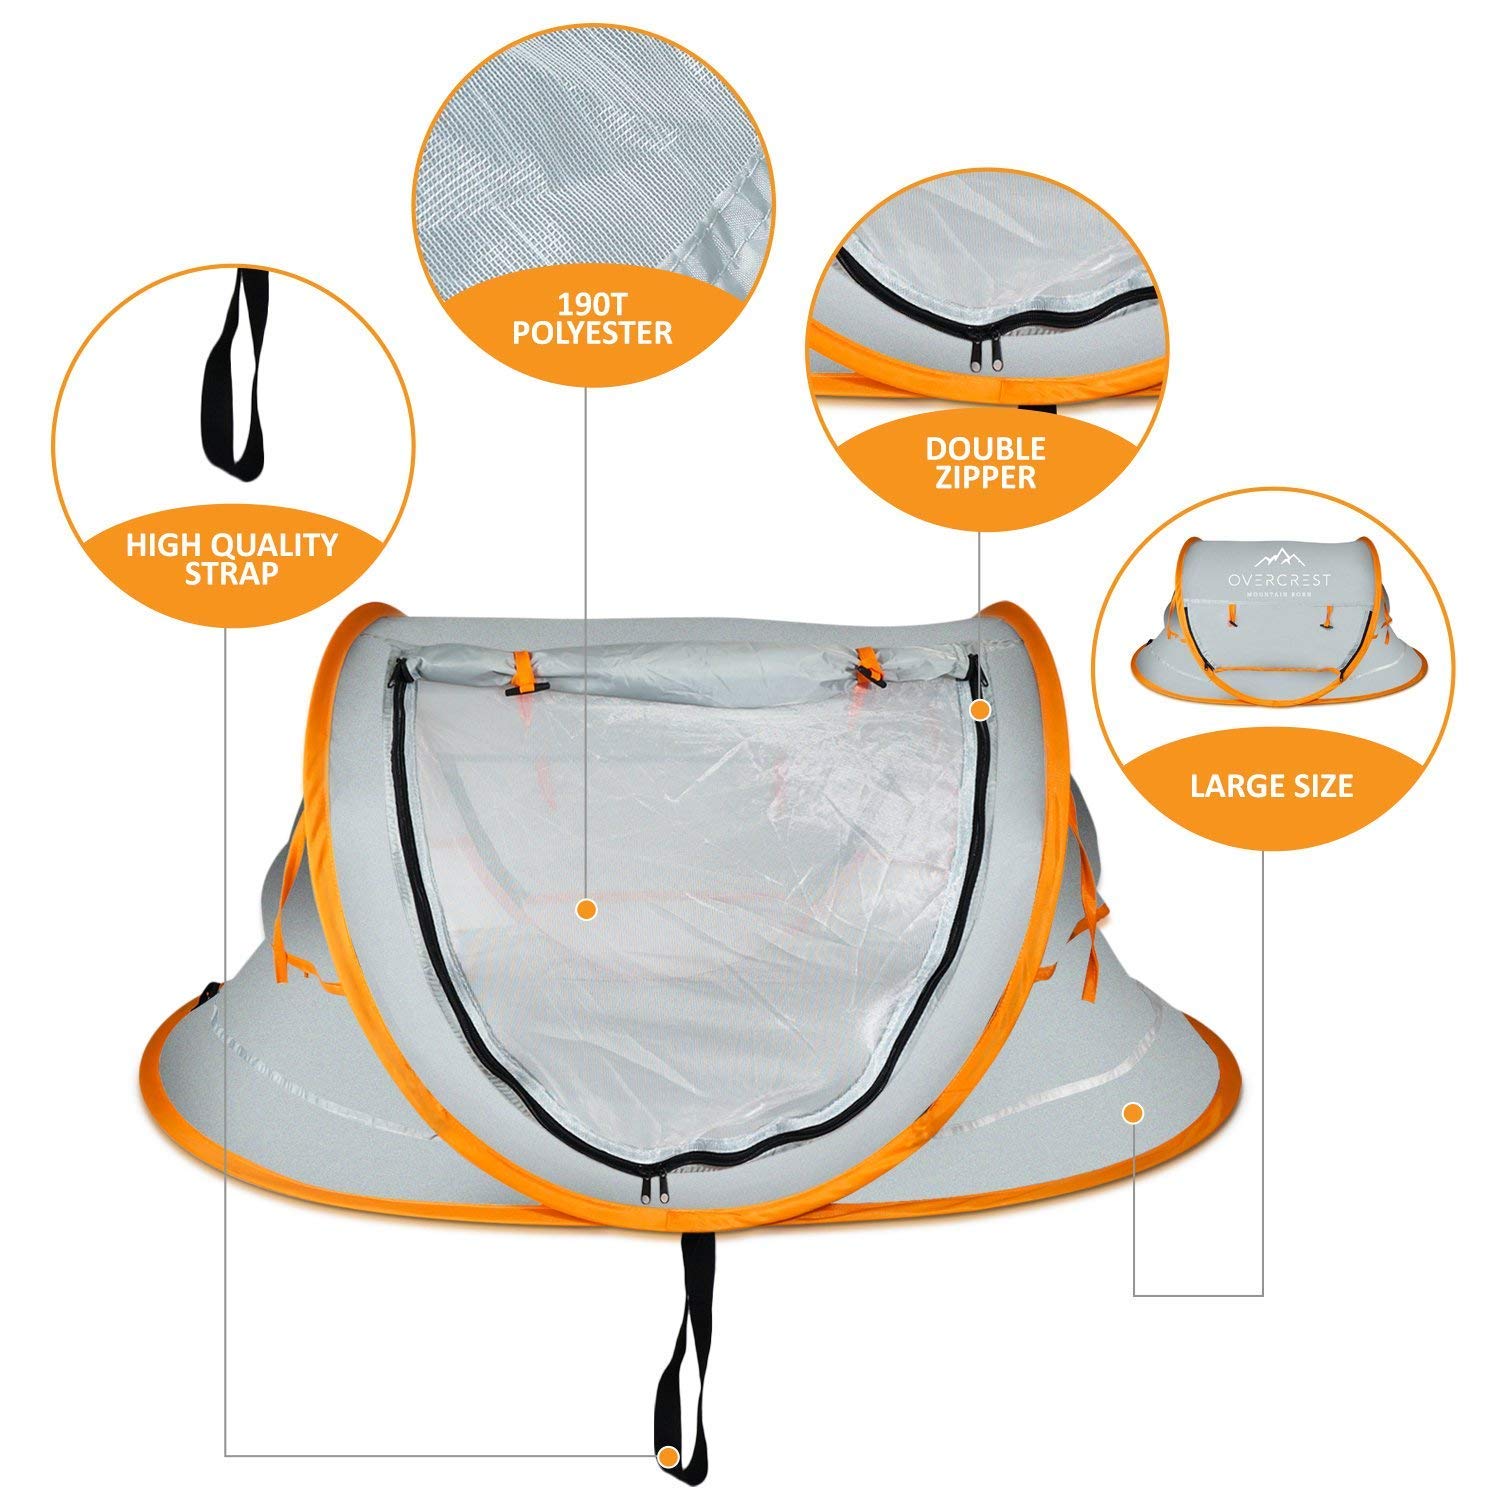 Overcrest Portable Pop Up Baby Beach Tent with UPF 50+ Sun Shade - Protection for Babies from Sunburn and Mosquitos - Lightweight, Compact and Easy Assembly - Includes 2 Pegs and Travel Bag